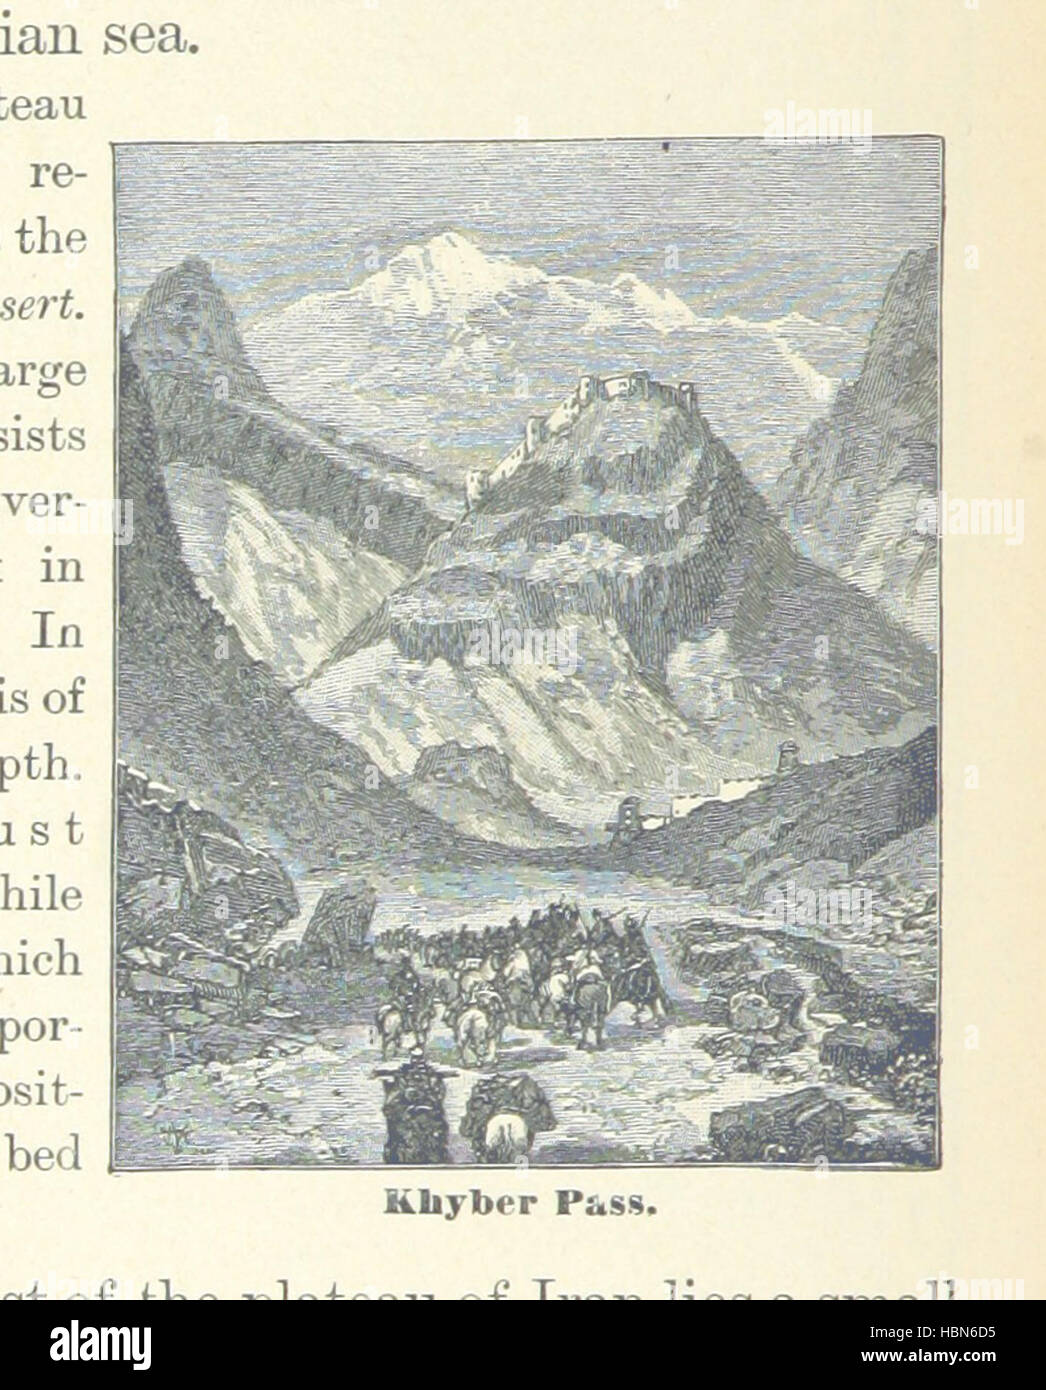 Image taken from page 178 of 'New Canadian Geography specially adapted for use in Public and High Schools' Image taken from page 178 of 'New Canadian Geography specially Stock Photo